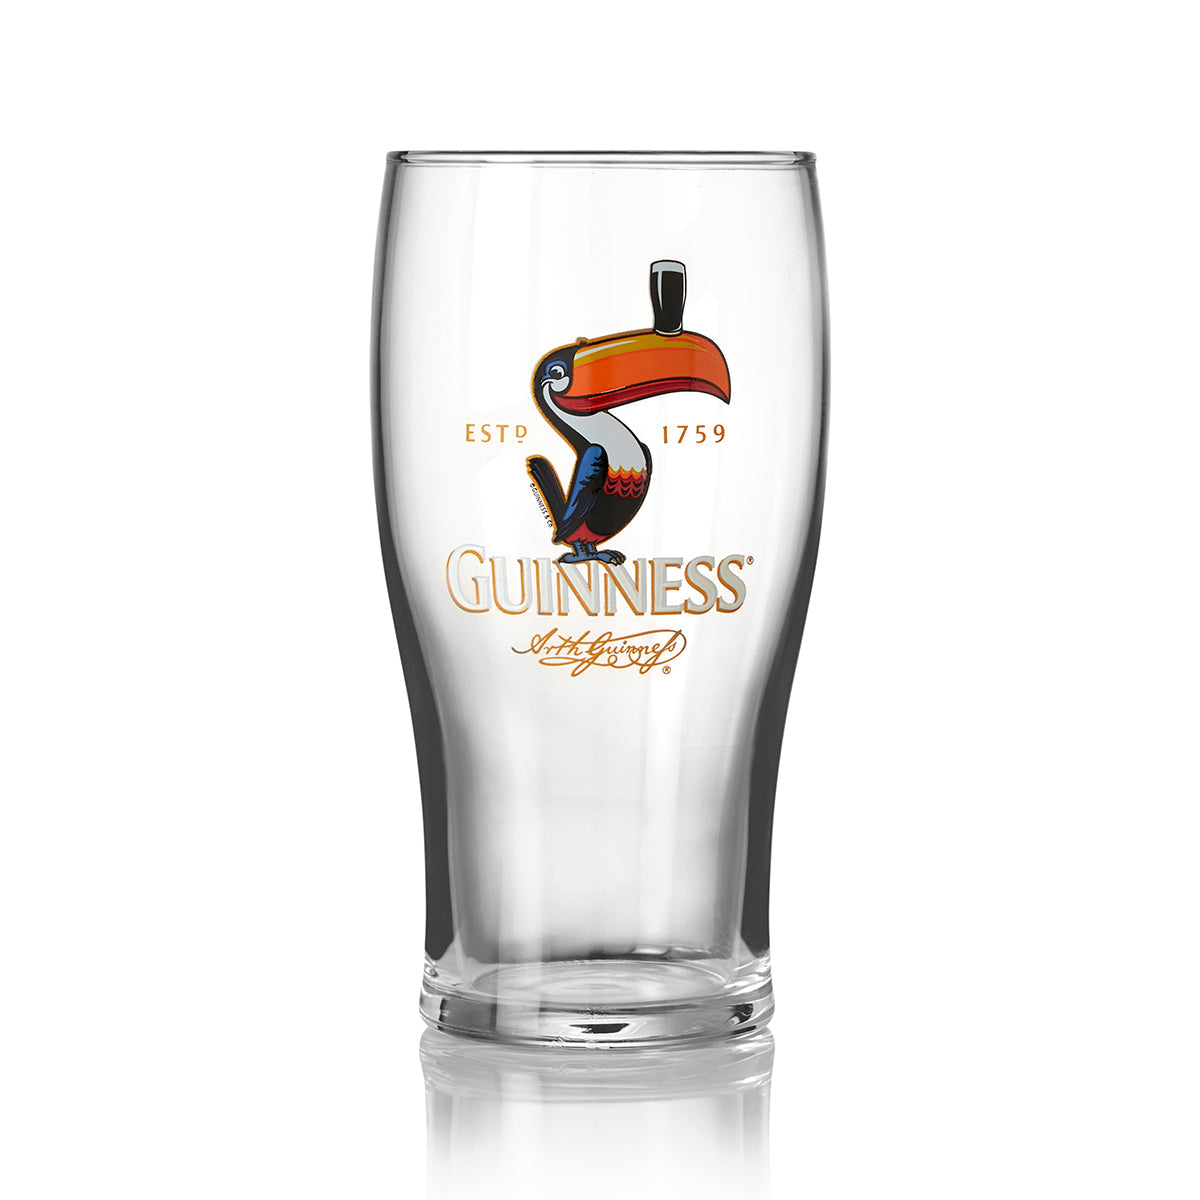 Guinness UK Toucan Pint Glass - 6 Pack is a must-have for any fan of the renowned Irish beer. This classic drinking glass features the iconic Guinness logo and is specifically designed to enhance.